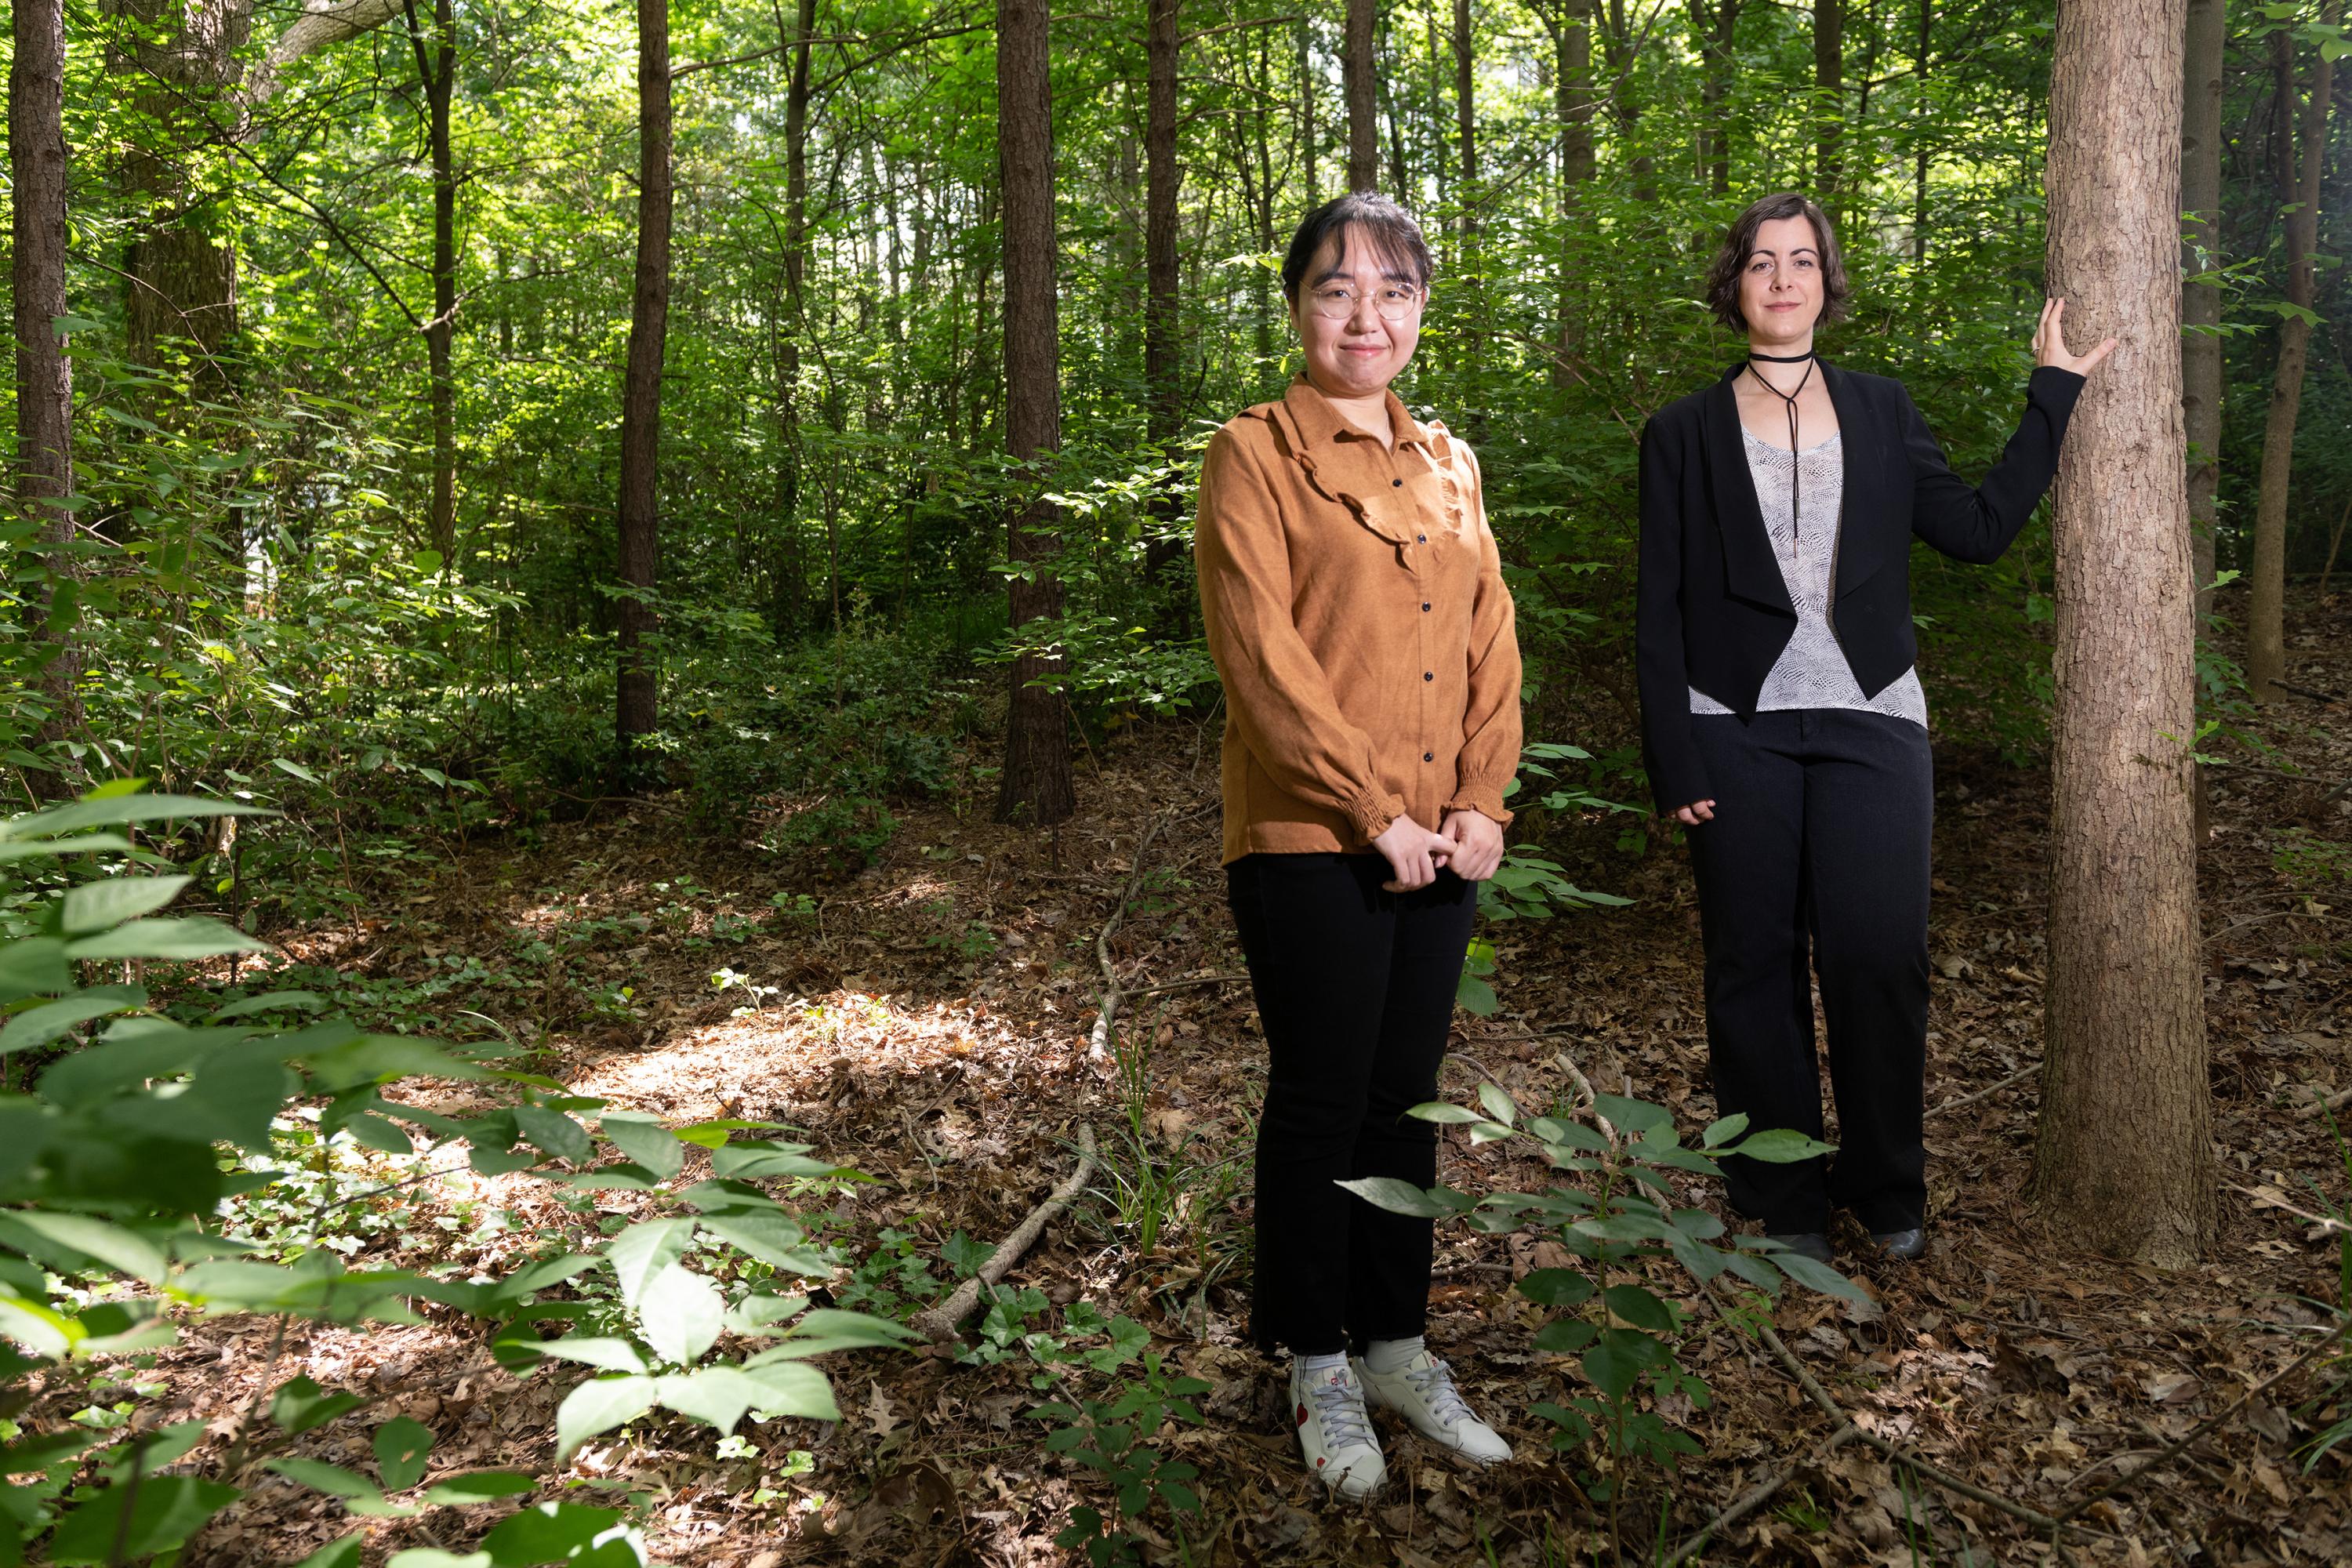 Georgia Tech Postdoctoral Fellow Yue Wang and Assistant Professor Jenny McGuire are studying pollen sample data from across the North American continent to develop improved strategies for conserving biodiversity. (Credit: Allison Carter, Georgia Tech)